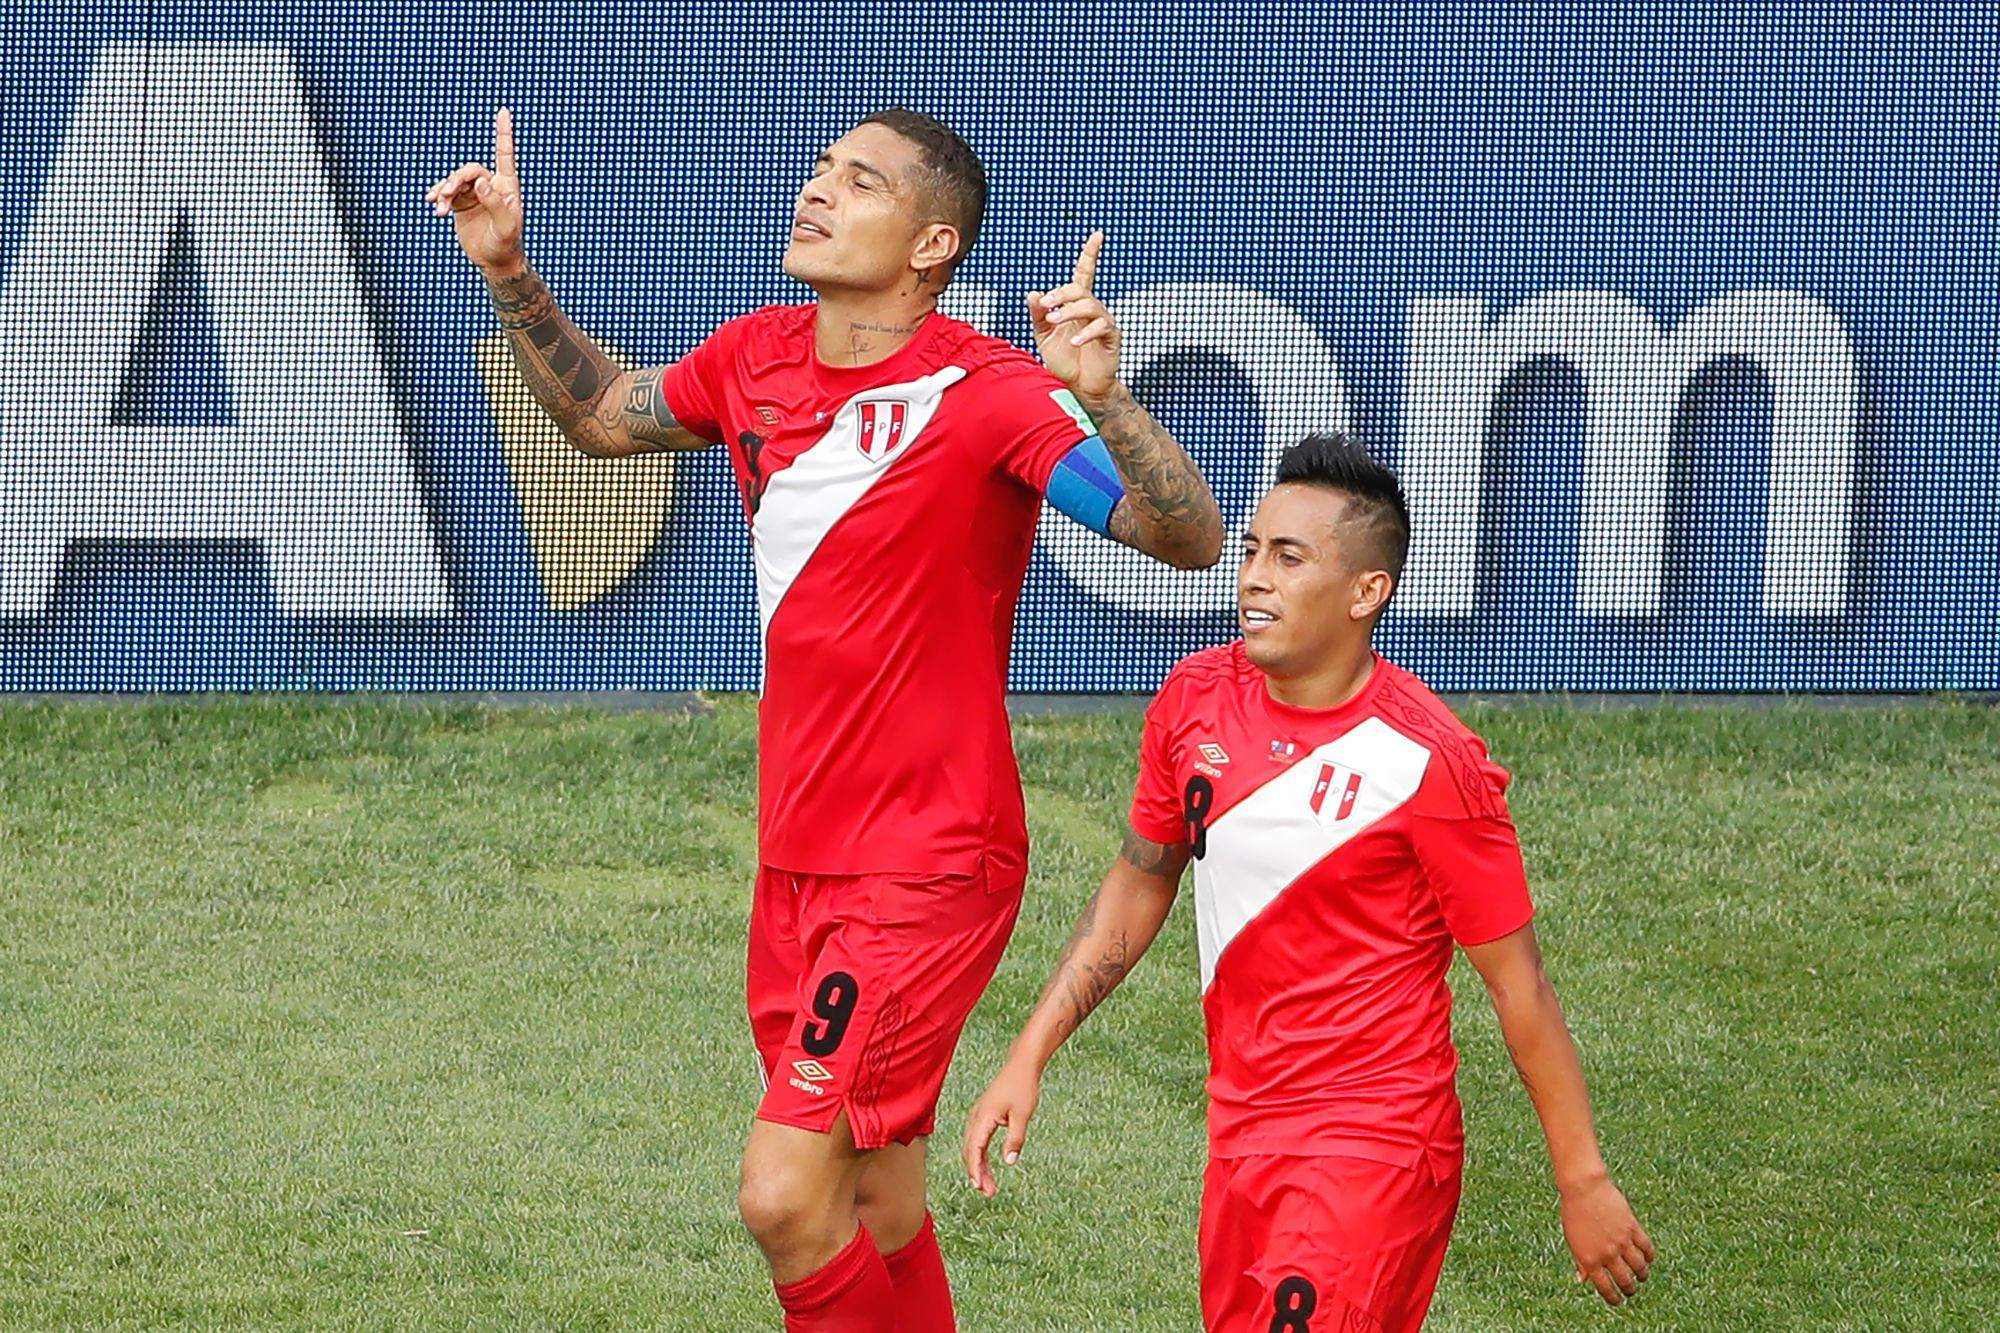 Having had his ban temporarily frozen, Paolo Guerrero scored in Peru's 2-0 FIFA World Cup win over Australia ©Getty Images